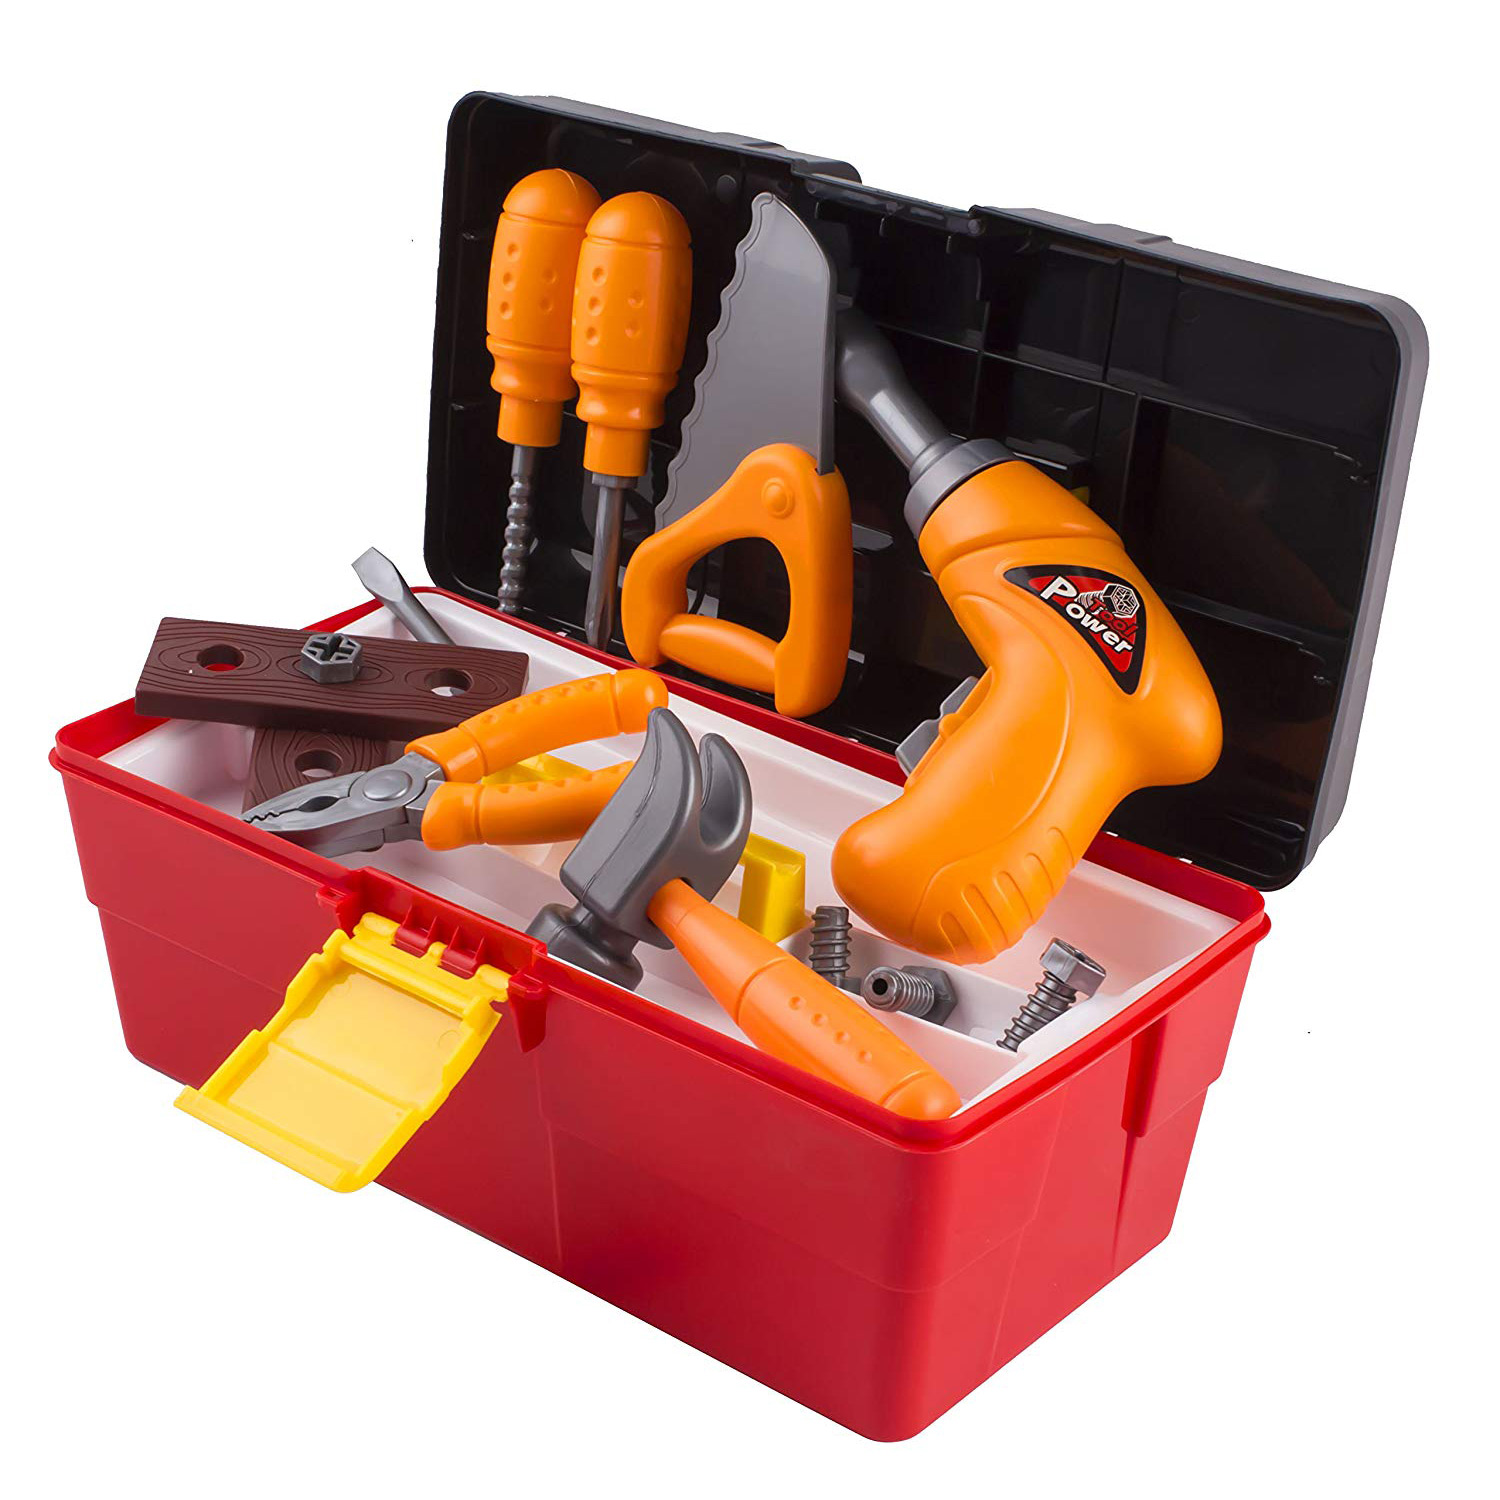 44 Piece Toy Tool Set With Construction Kit Accessories Portable Realistic Tools  Box Including Electric Drill Hammer Wrench Screwdriver F1 Car Perfect For  Boys Children's Educational STEM Pretend Play, Toyz-X